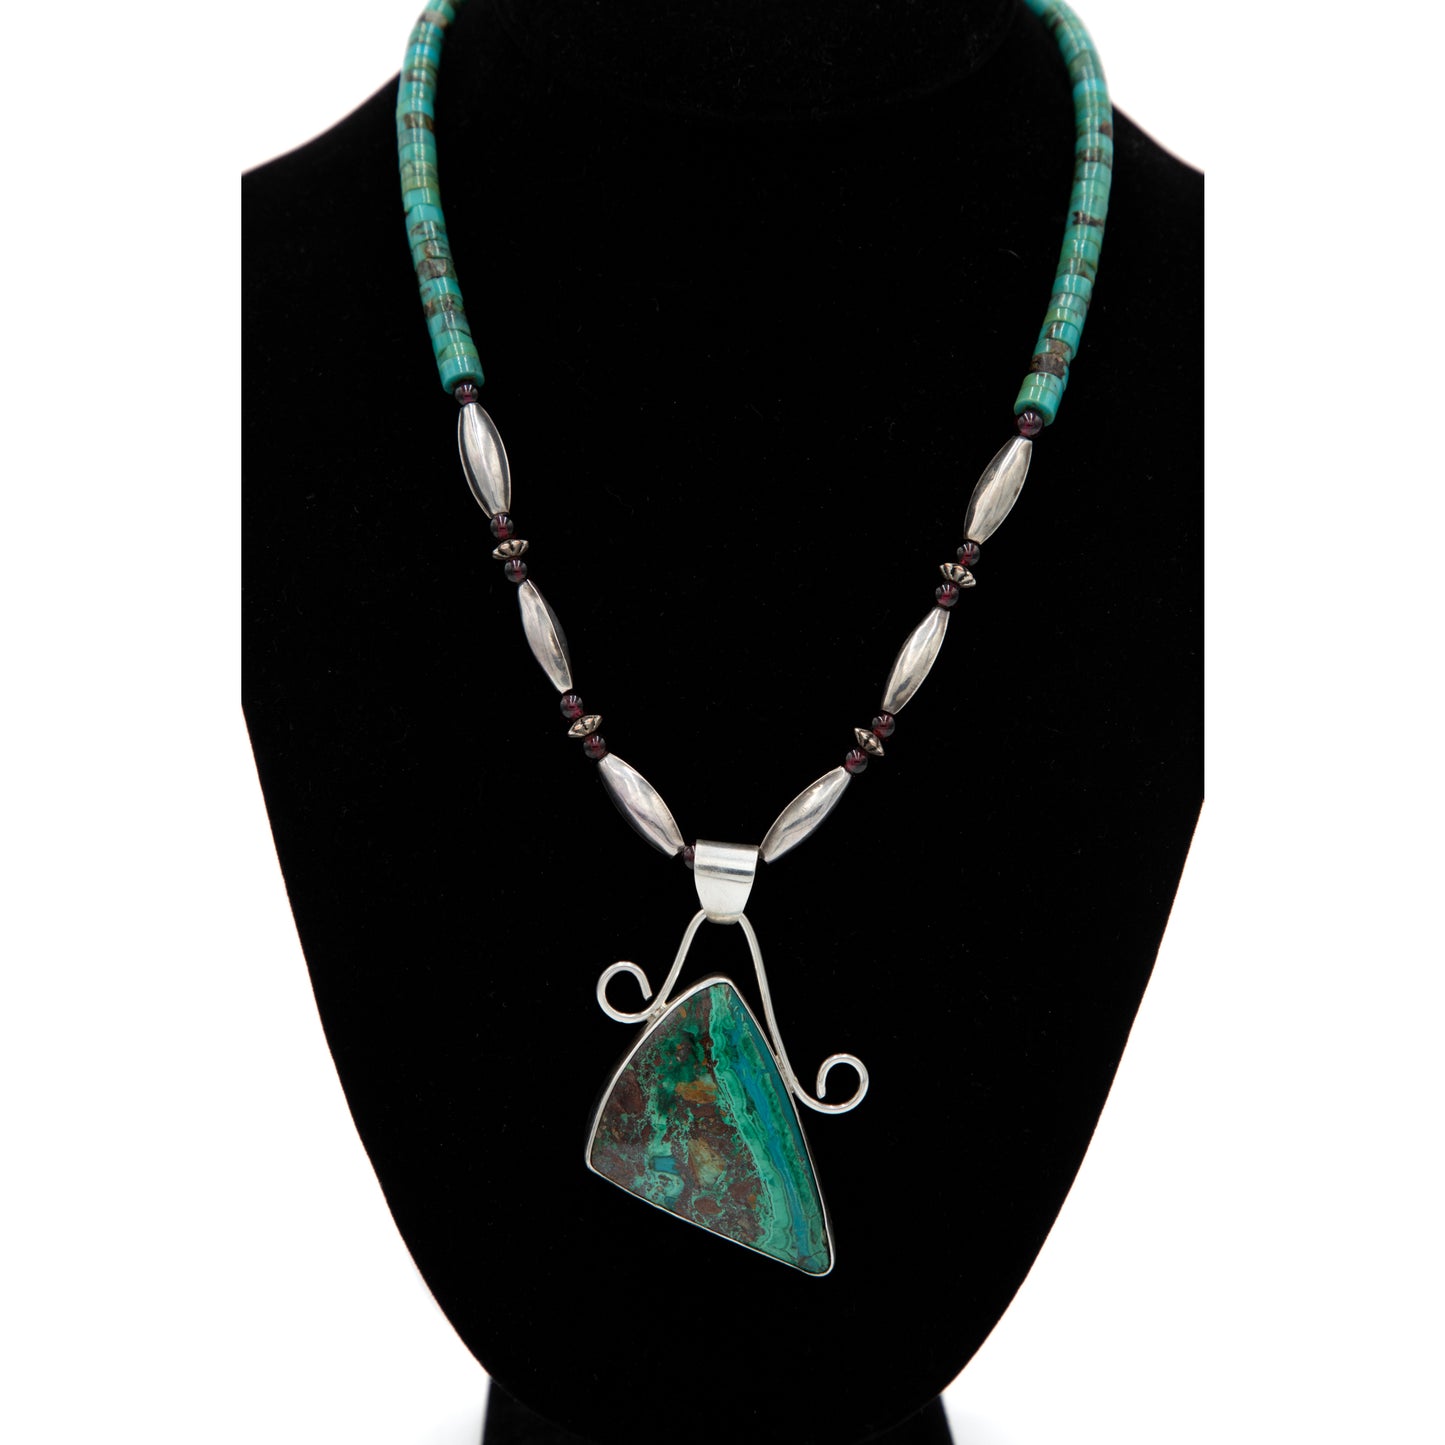 Royston with Turquoise Beads Necklace